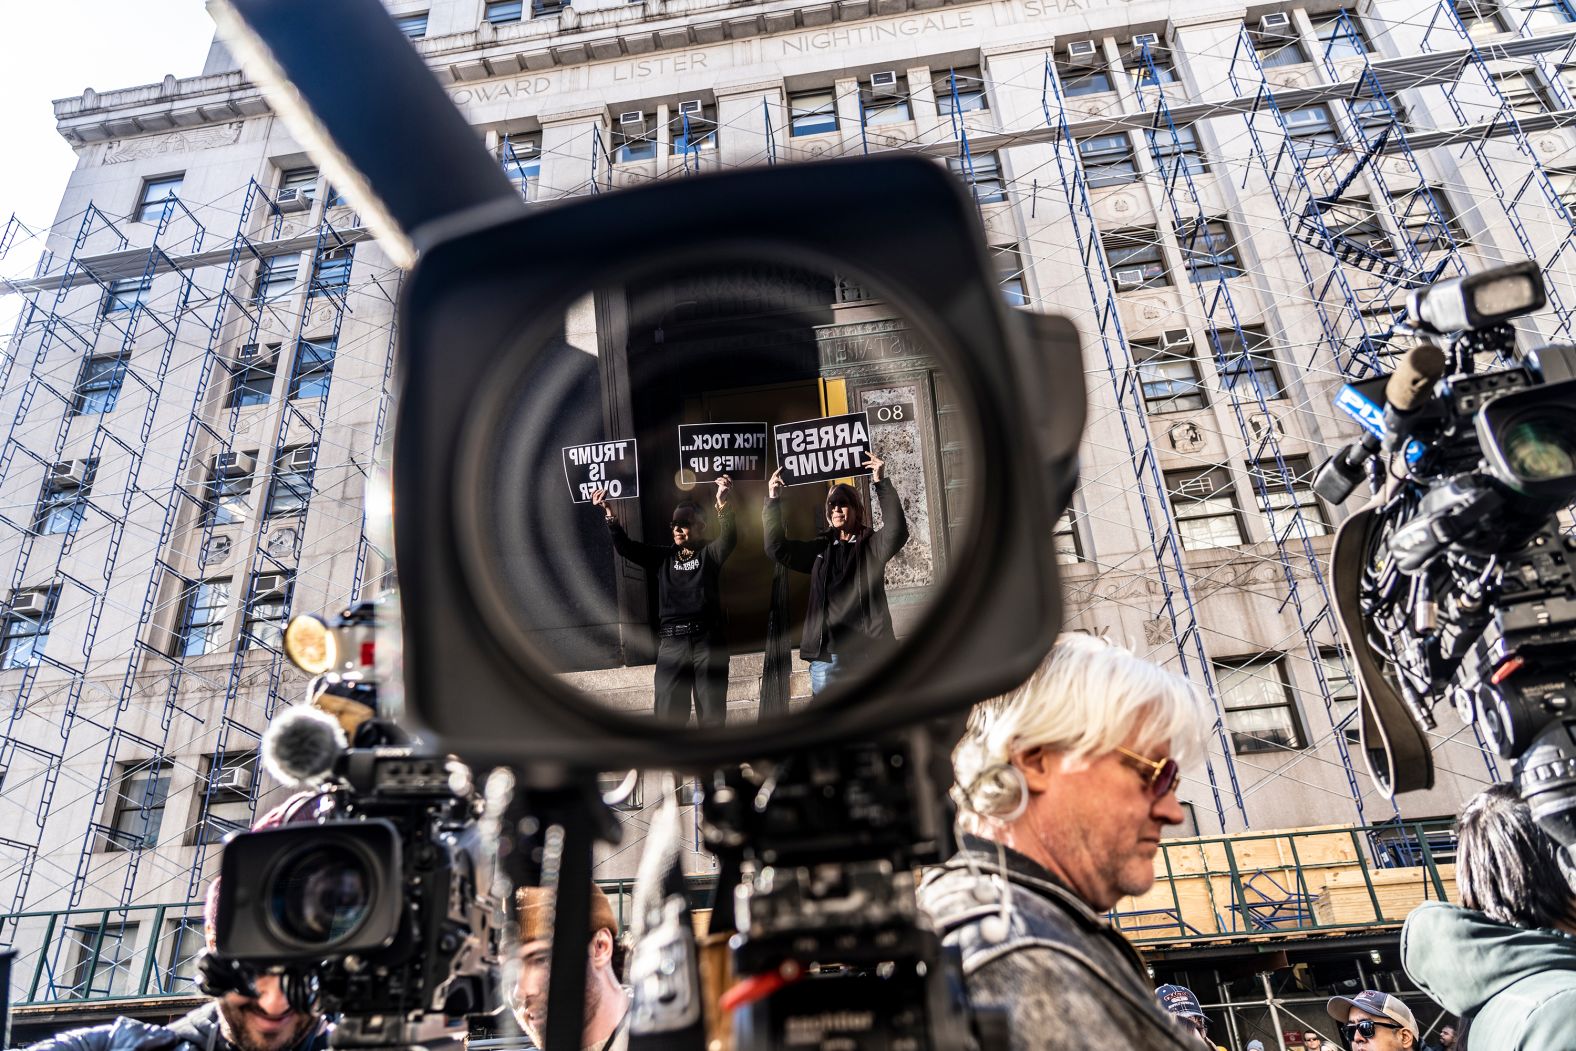 Media and protesters are seen outside Bragg's office in New York on March 20, 2023. A couple of days earlier, Trump said in a social media post <a href="index.php?page=&url=https%3A%2F%2Fwww.cnn.com%2F2023%2F03%2F18%2Fpolitics%2Fdonald-trump-manhattan-da-arrest-protests%2Findex.html" target="_blank">that he expected to be arrested within days</a>.